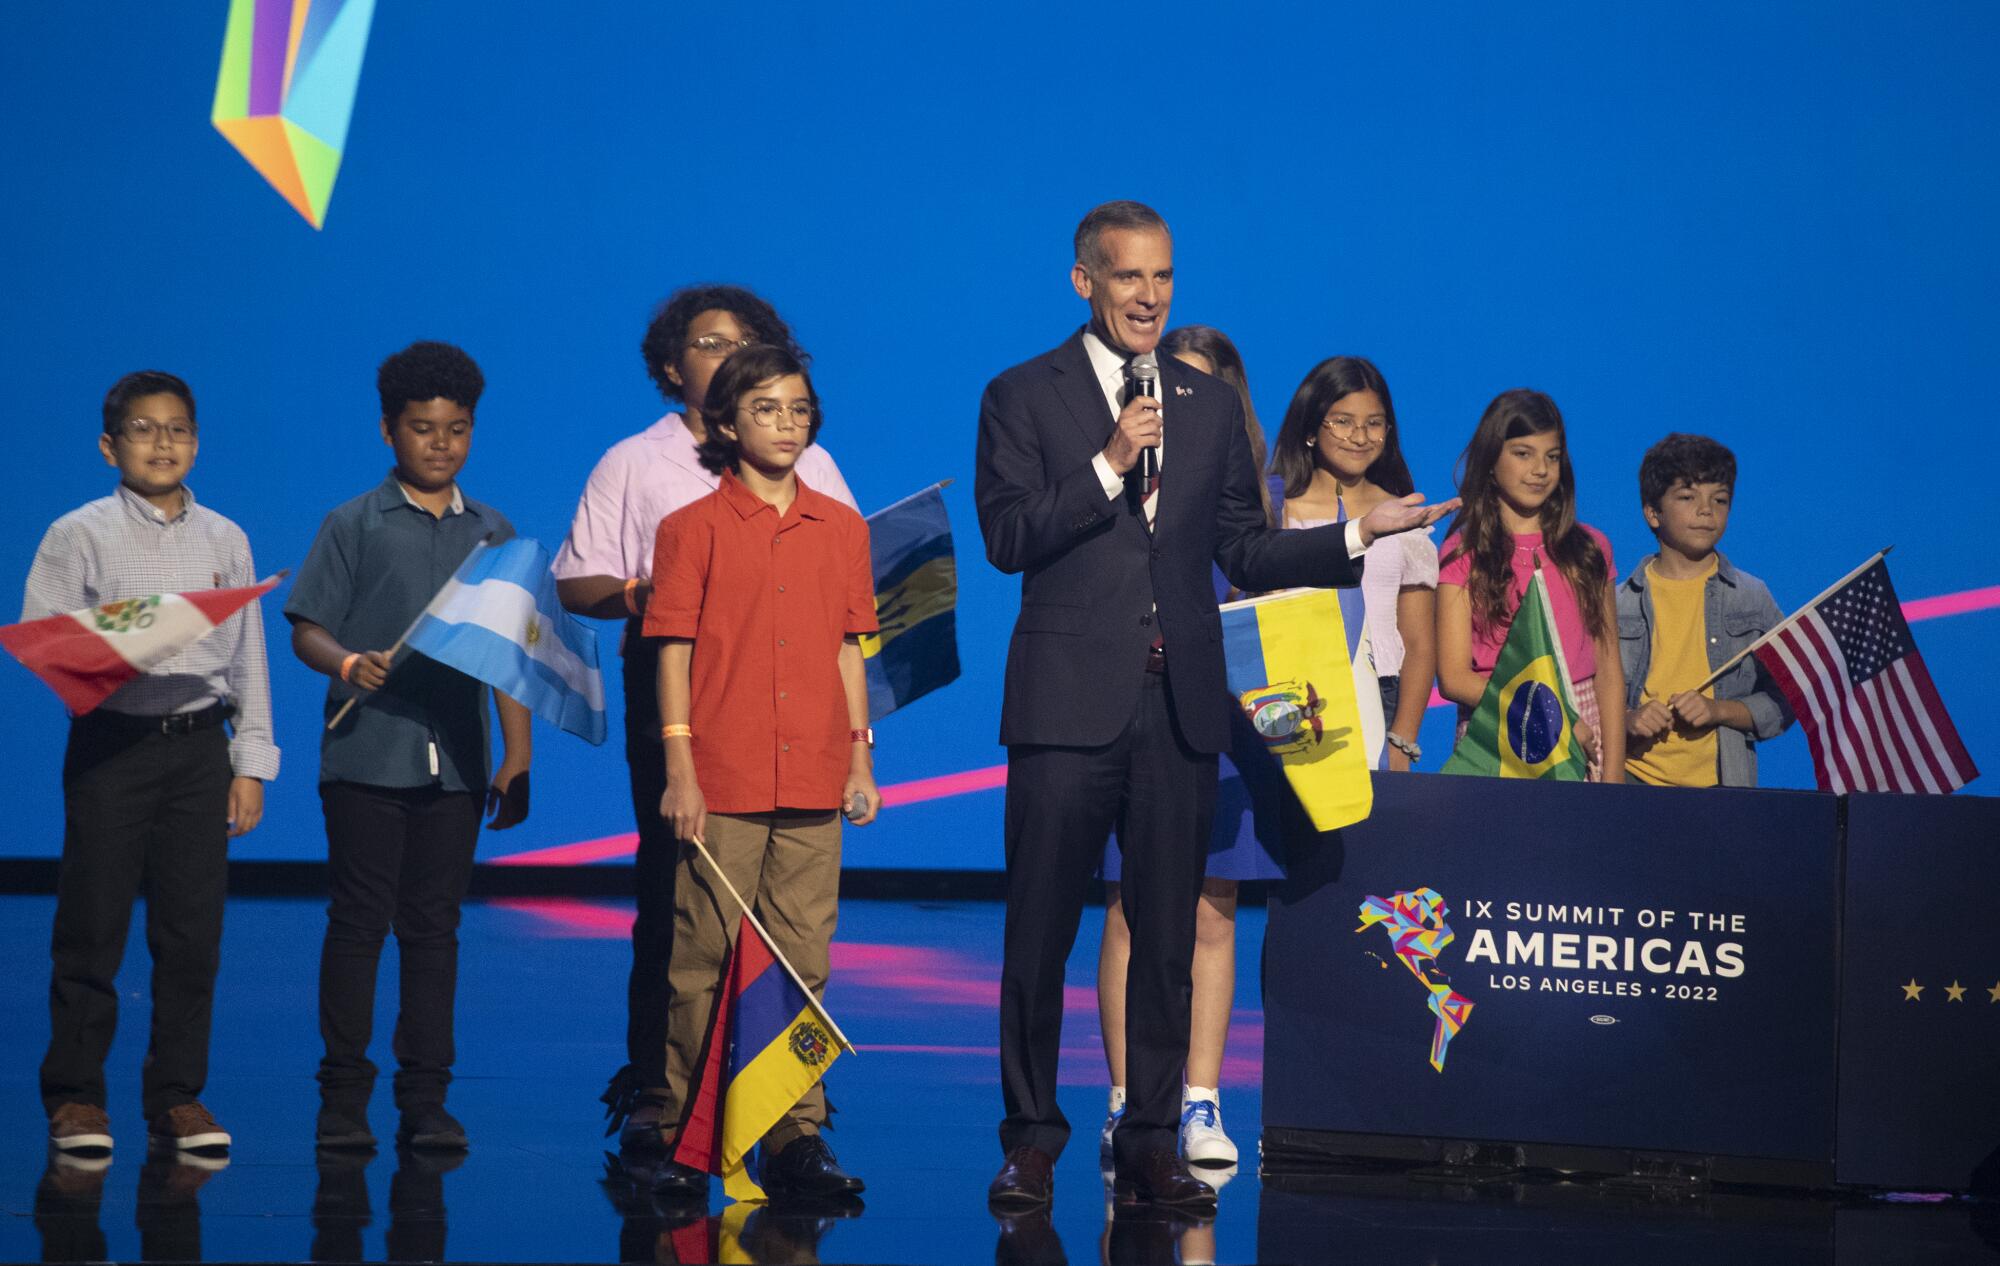 Mayor Eric Garcetti during the Inaugural Ceremony of the the Summit of the Americas at the Microsoft Theater